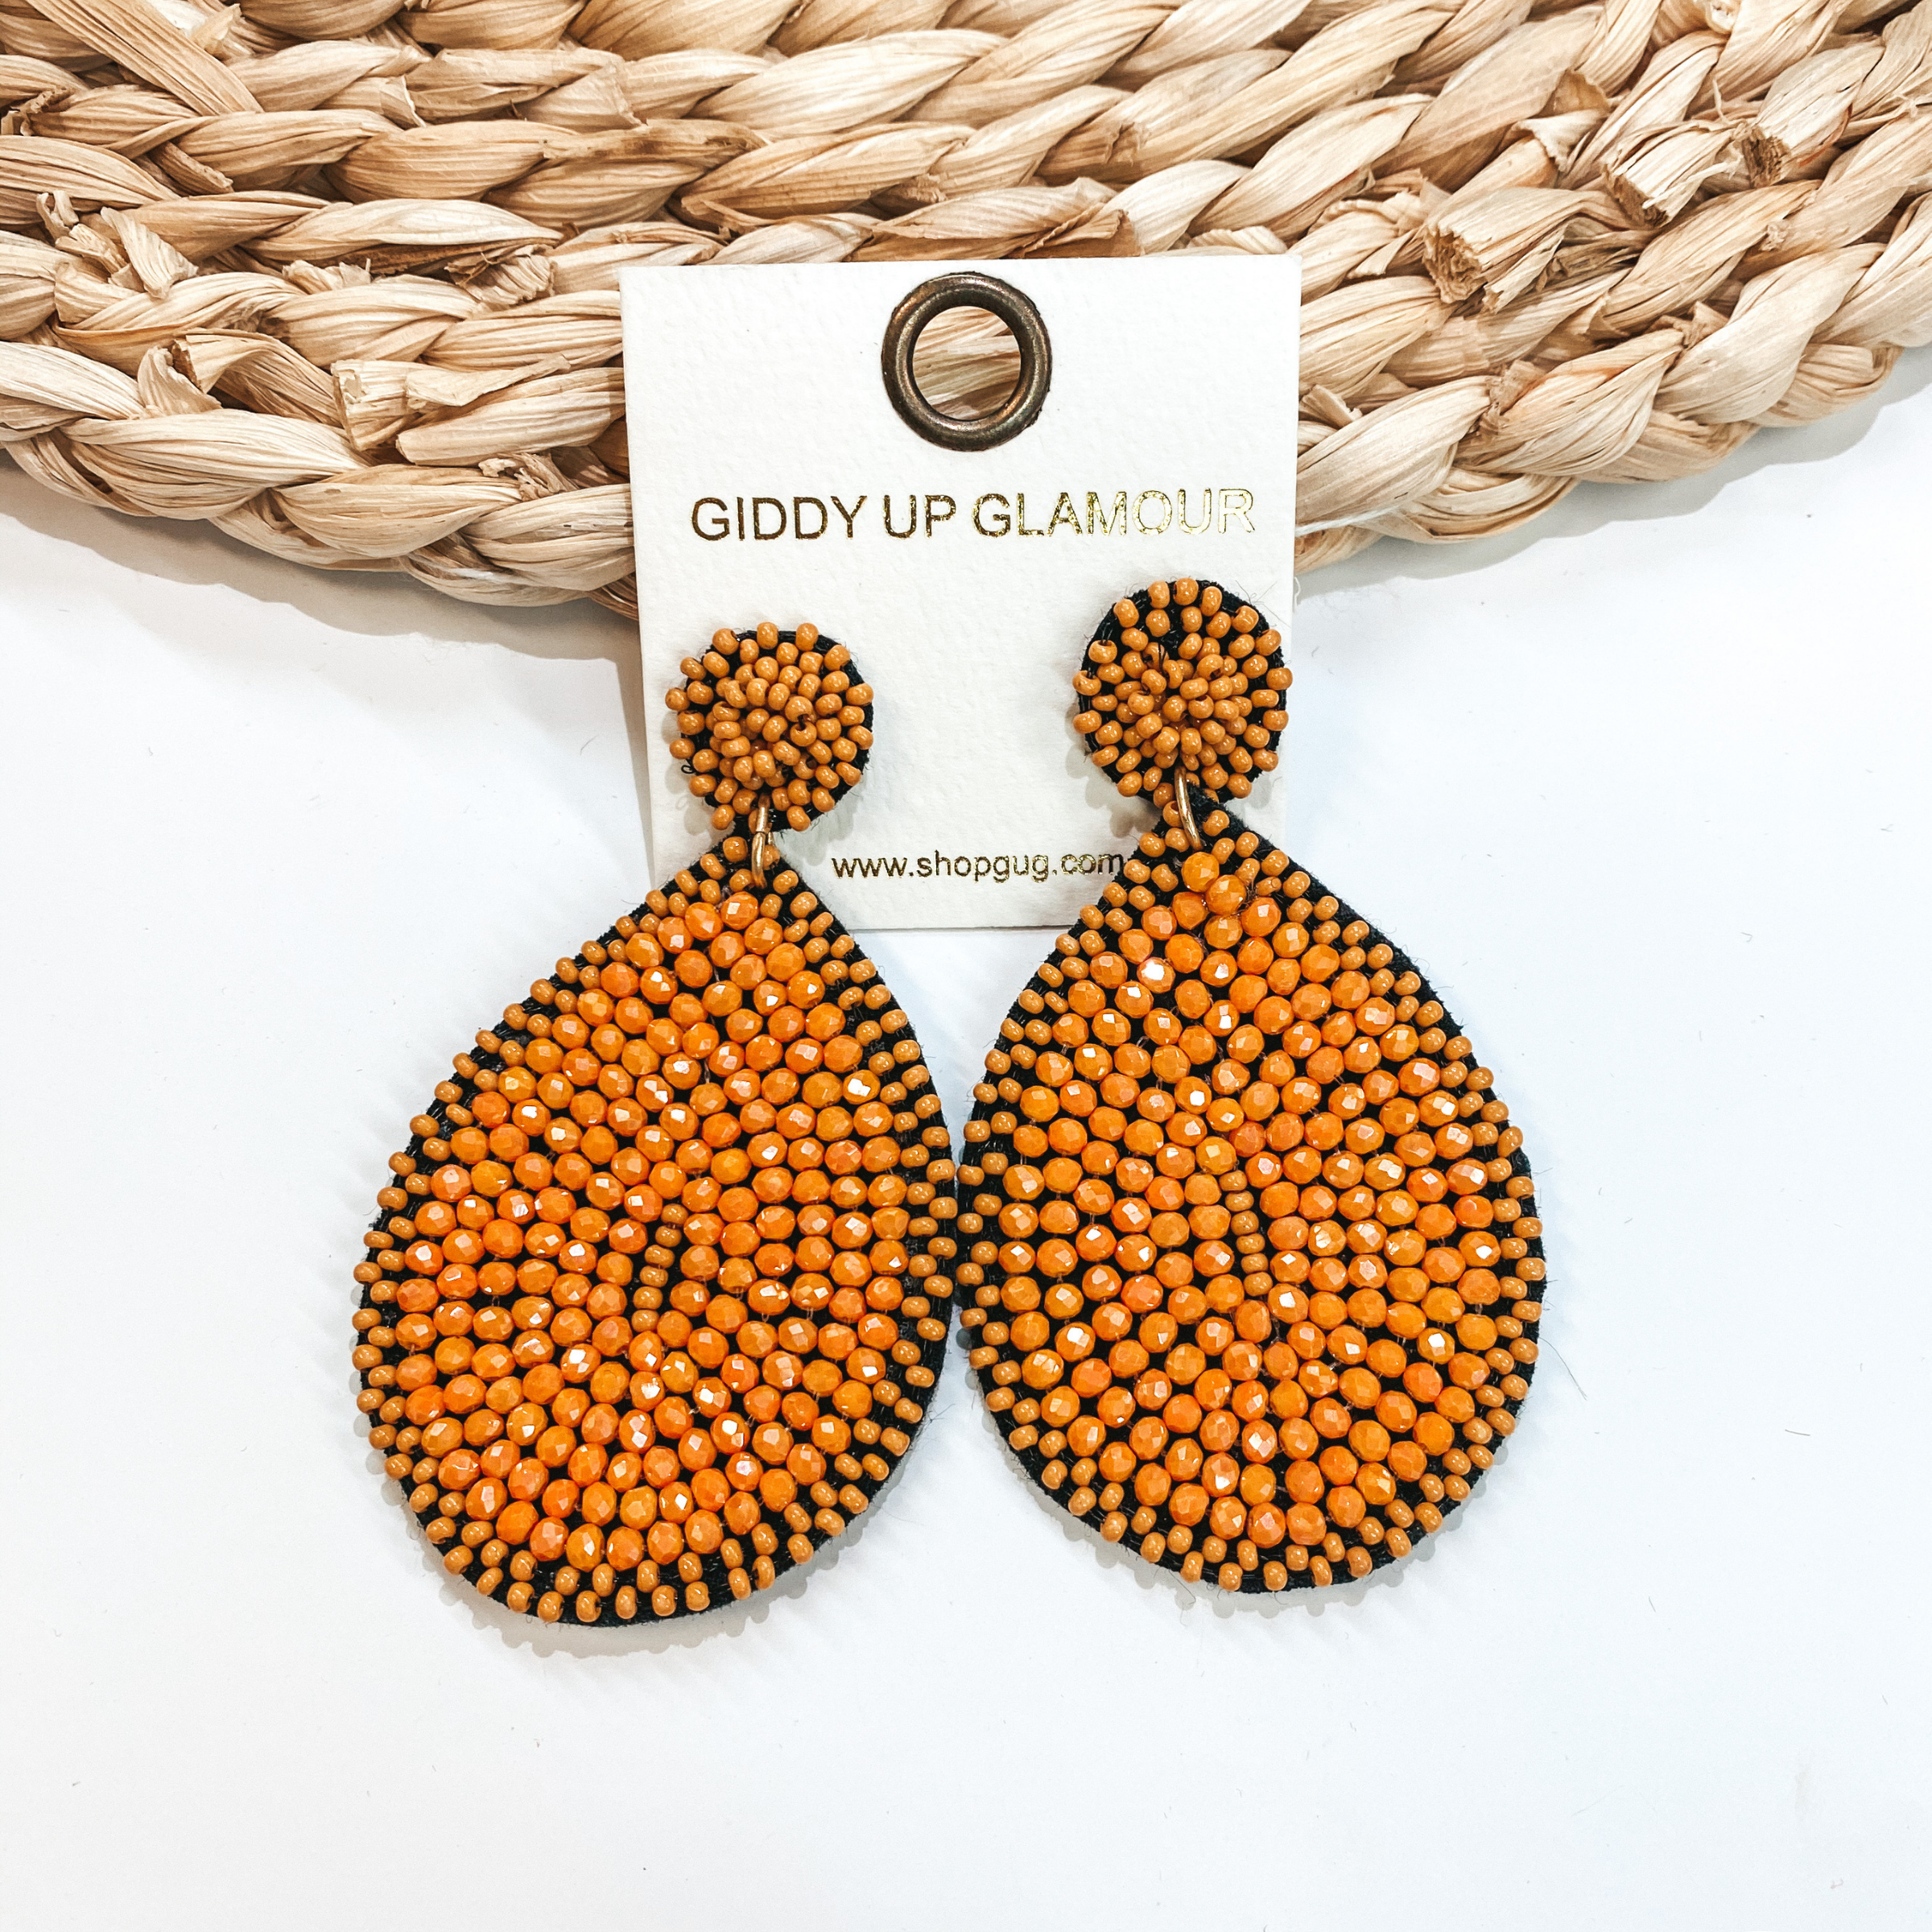 Crystal Beaded Circle Post Earrings with Large Teardrop Dangle in Orange - Giddy Up Glamour Boutique